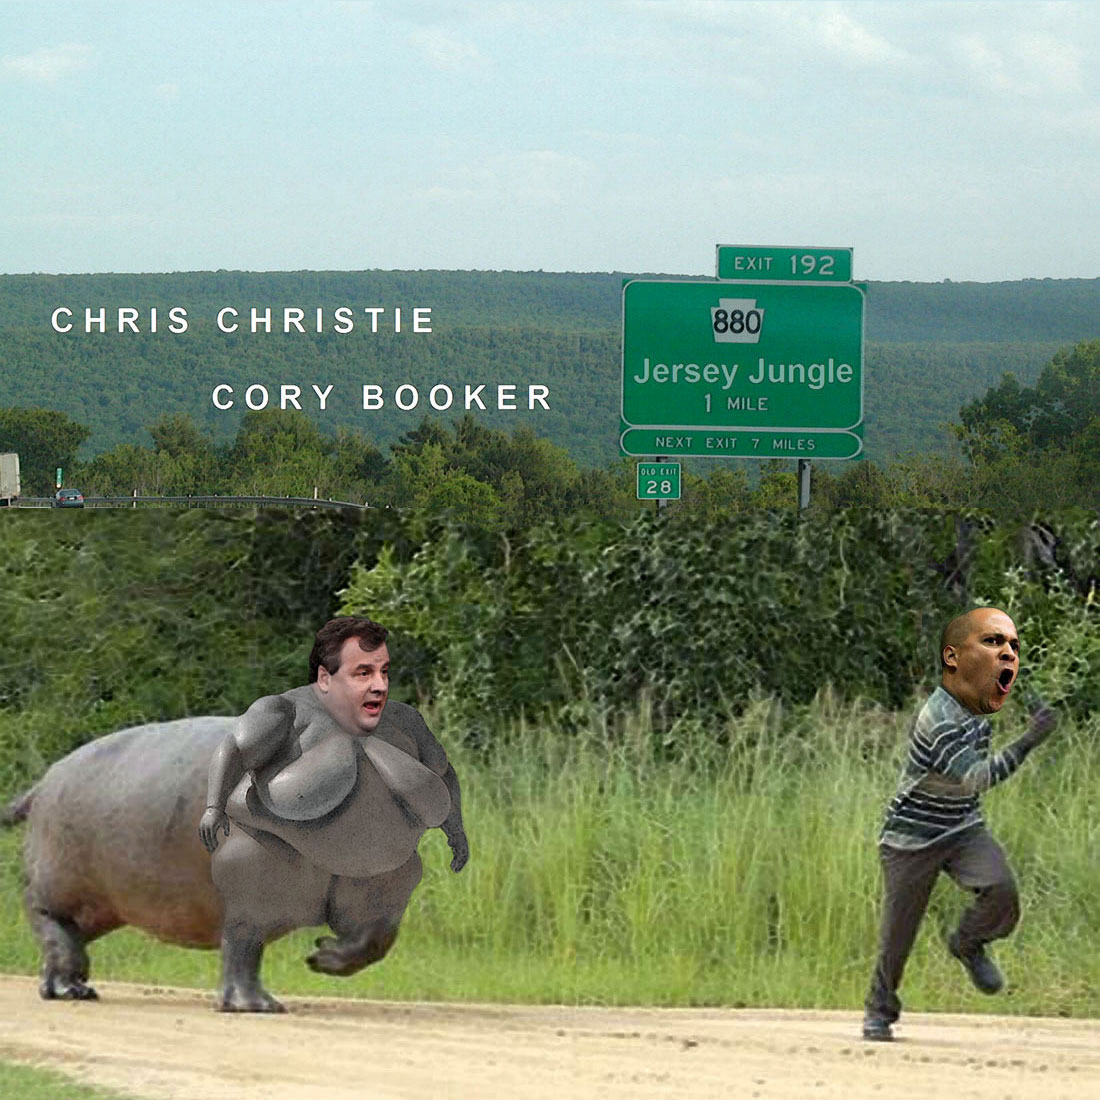 JERSEY JUNGLE starring Chris Christie and Cory Booker